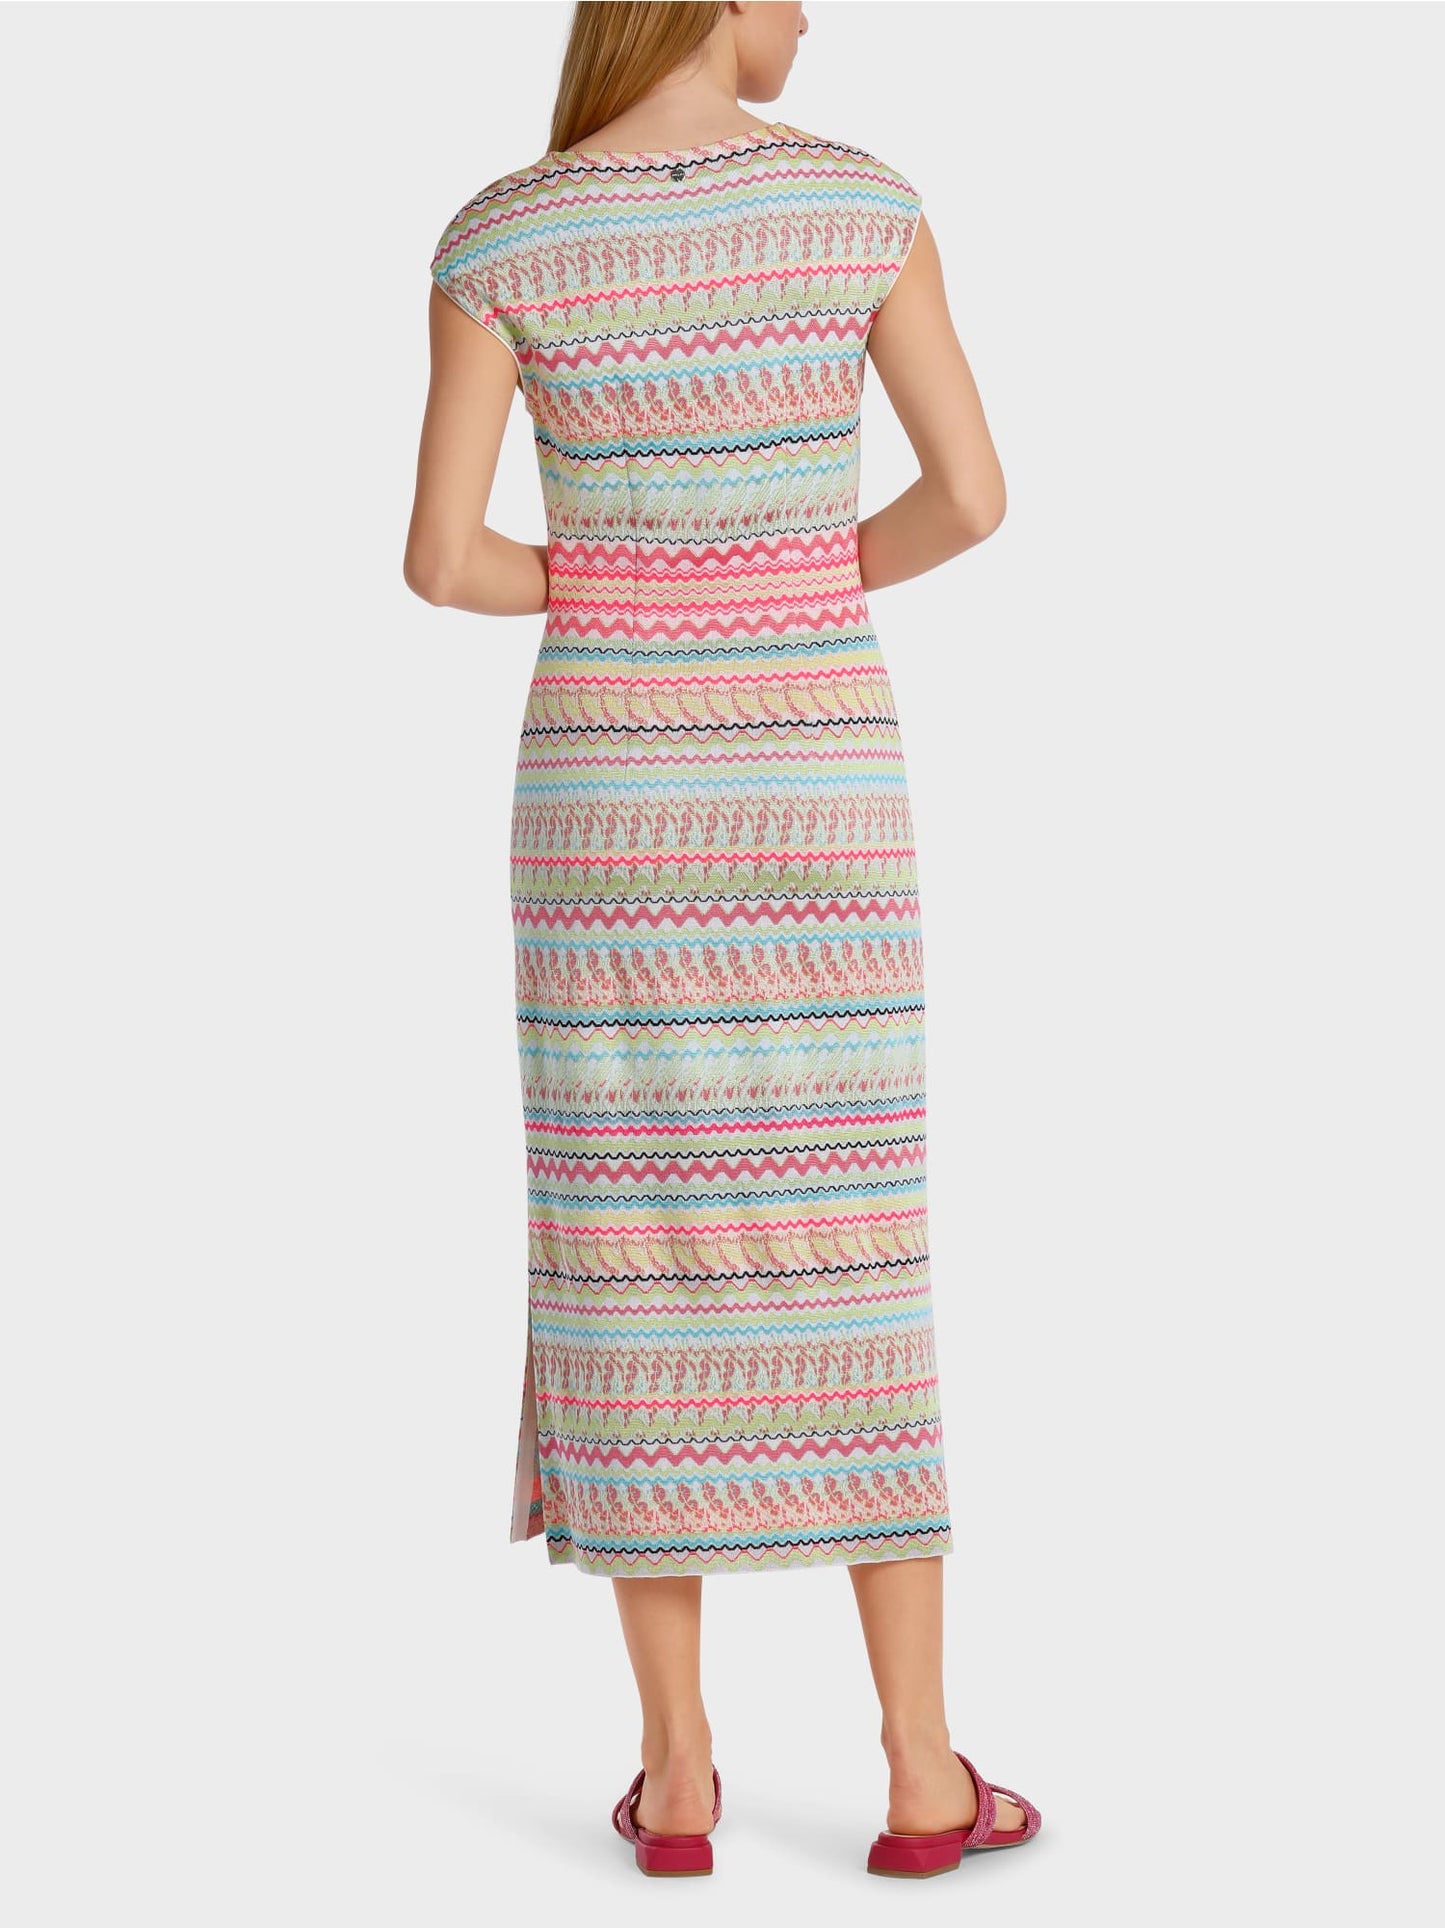 Narrow knit dress Knitted in Germany